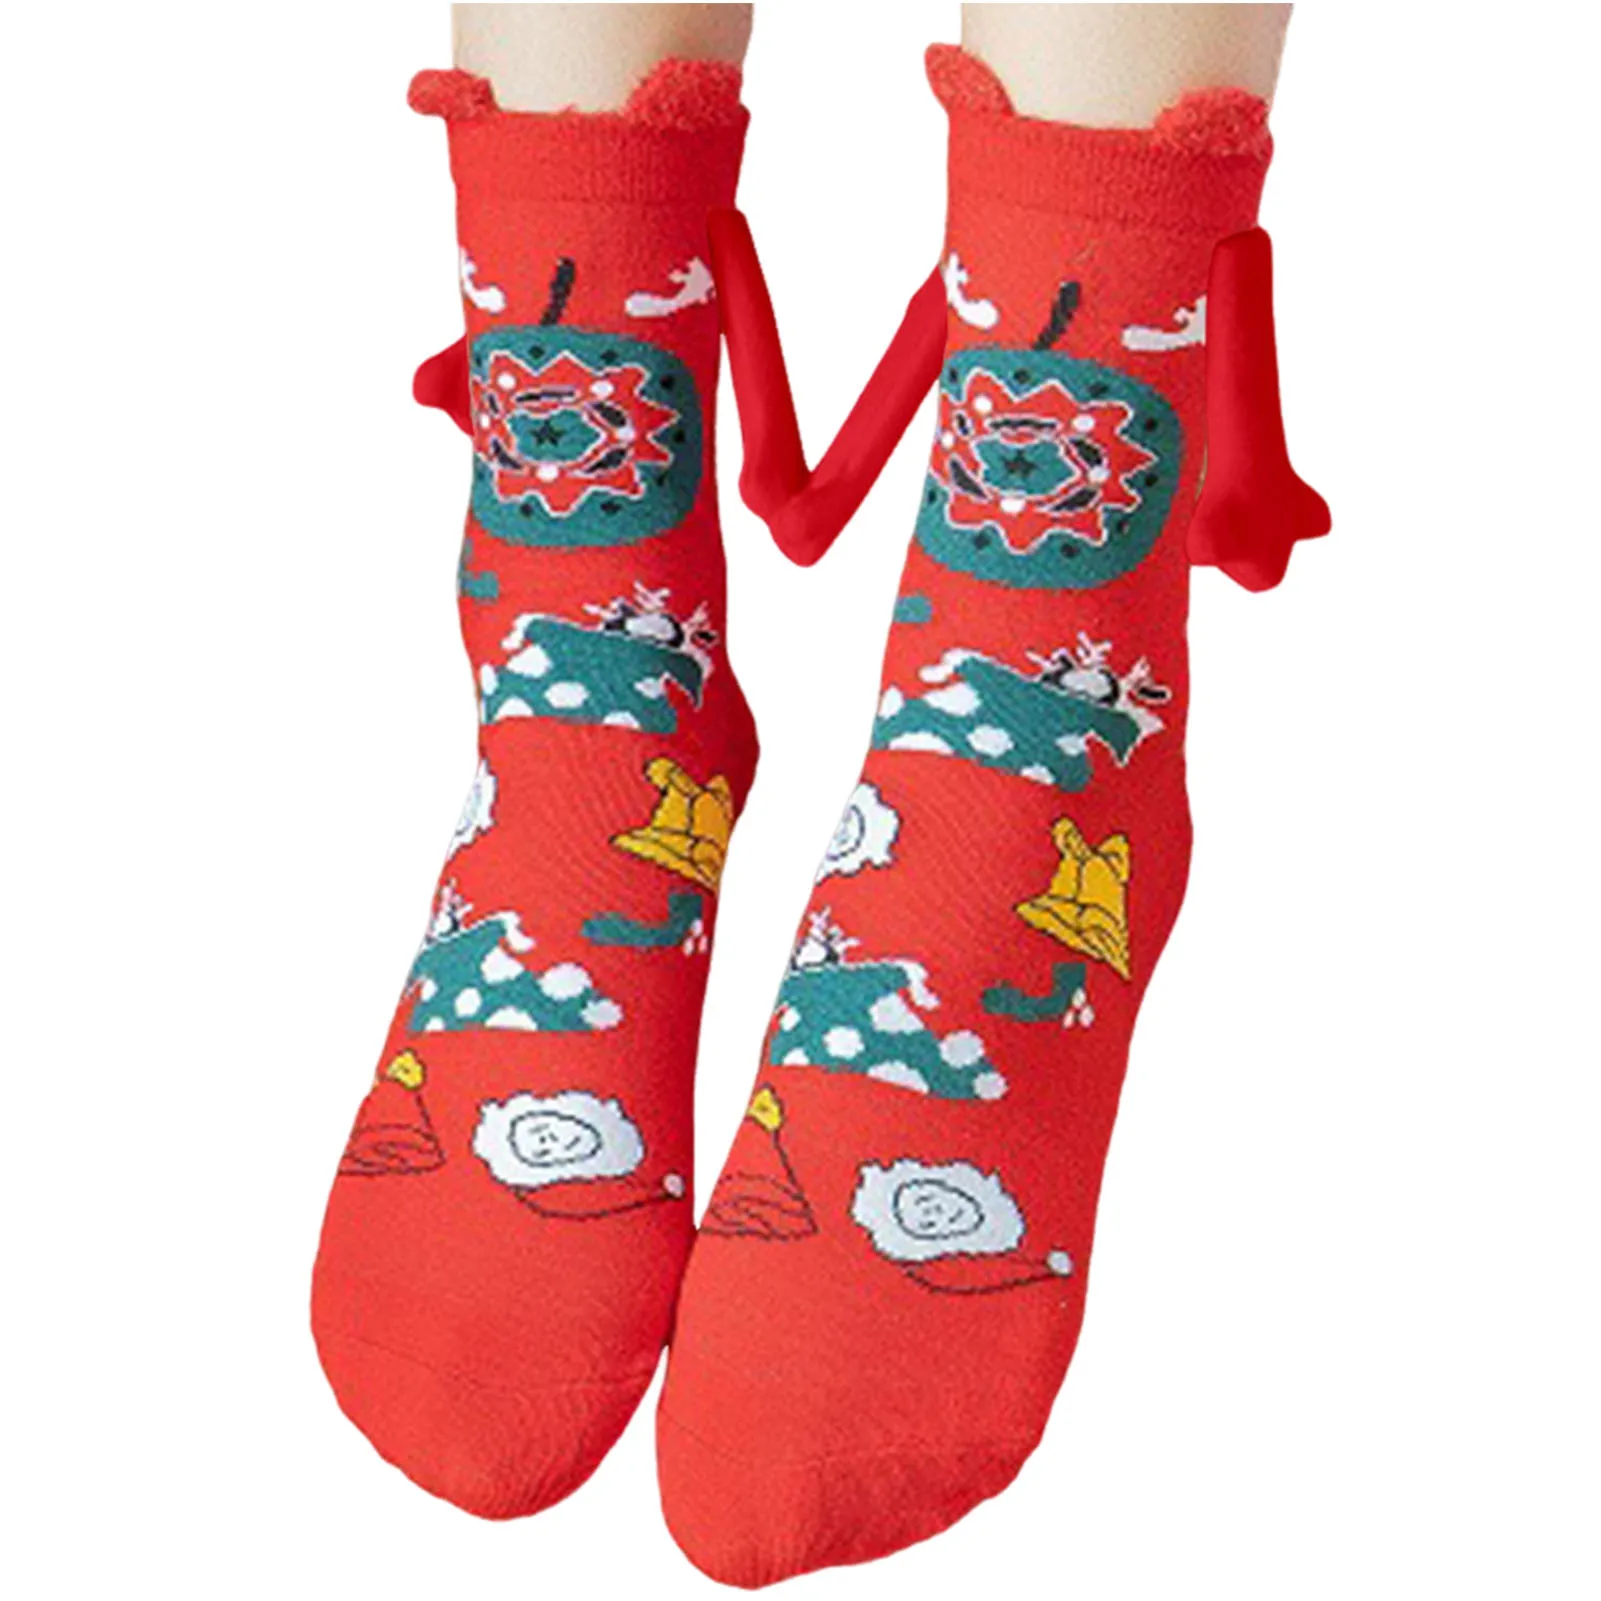 

Christmas Hand Holding Socks Magnetic Suction 3D Doll Socks Novelty Cute Xmas Socks for Couples Him and Her